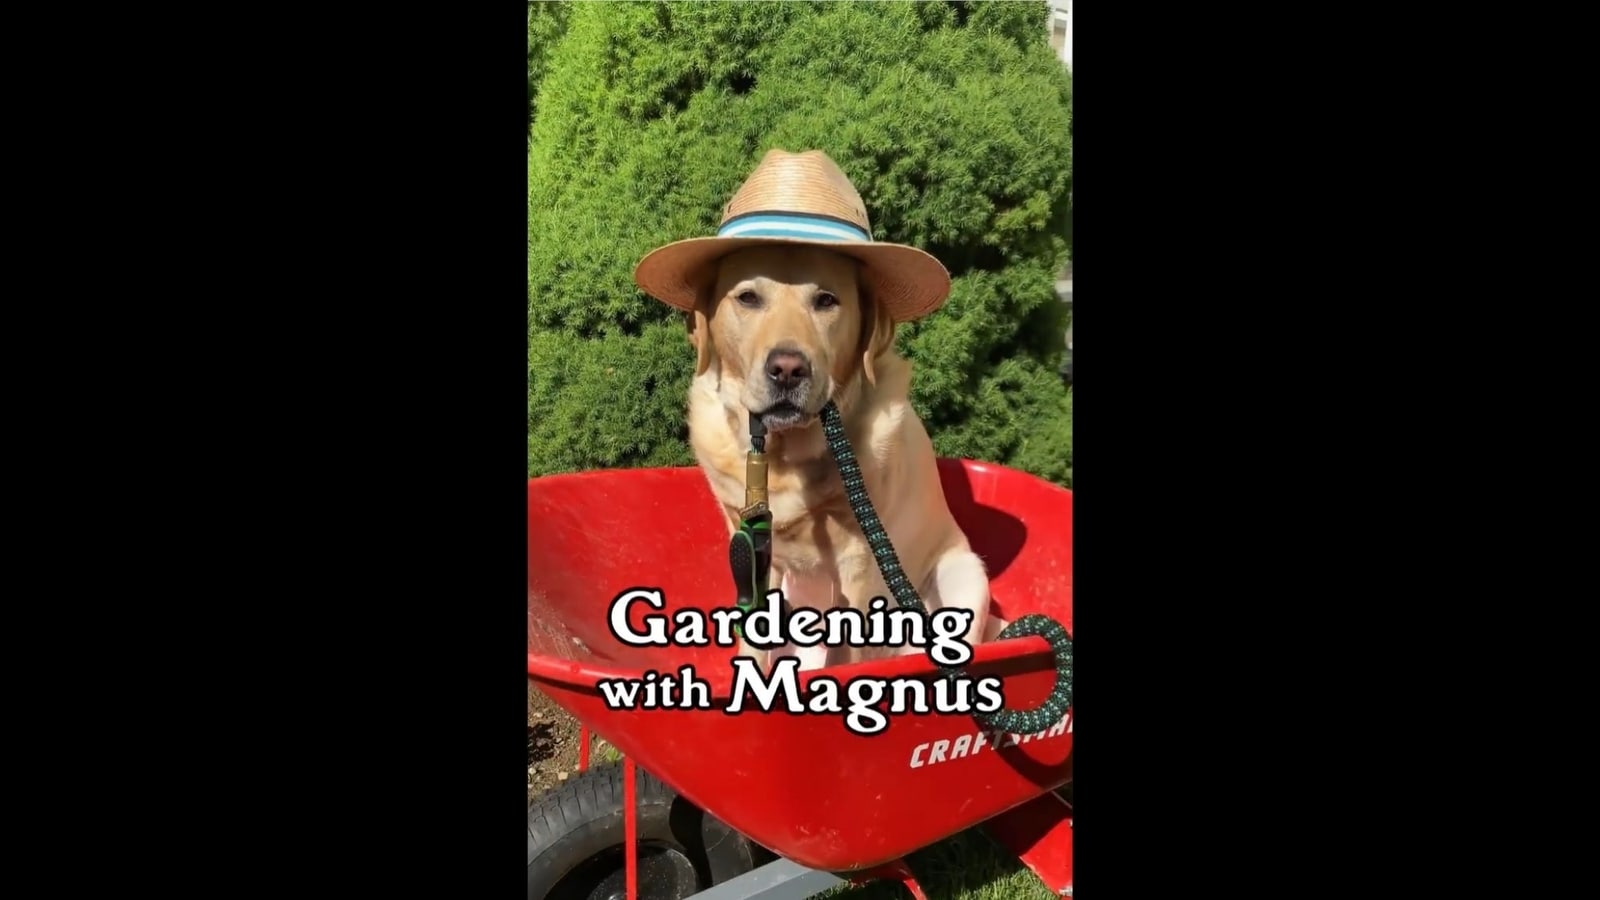 Labrador helps his human with gardening. Watch adorably cute video